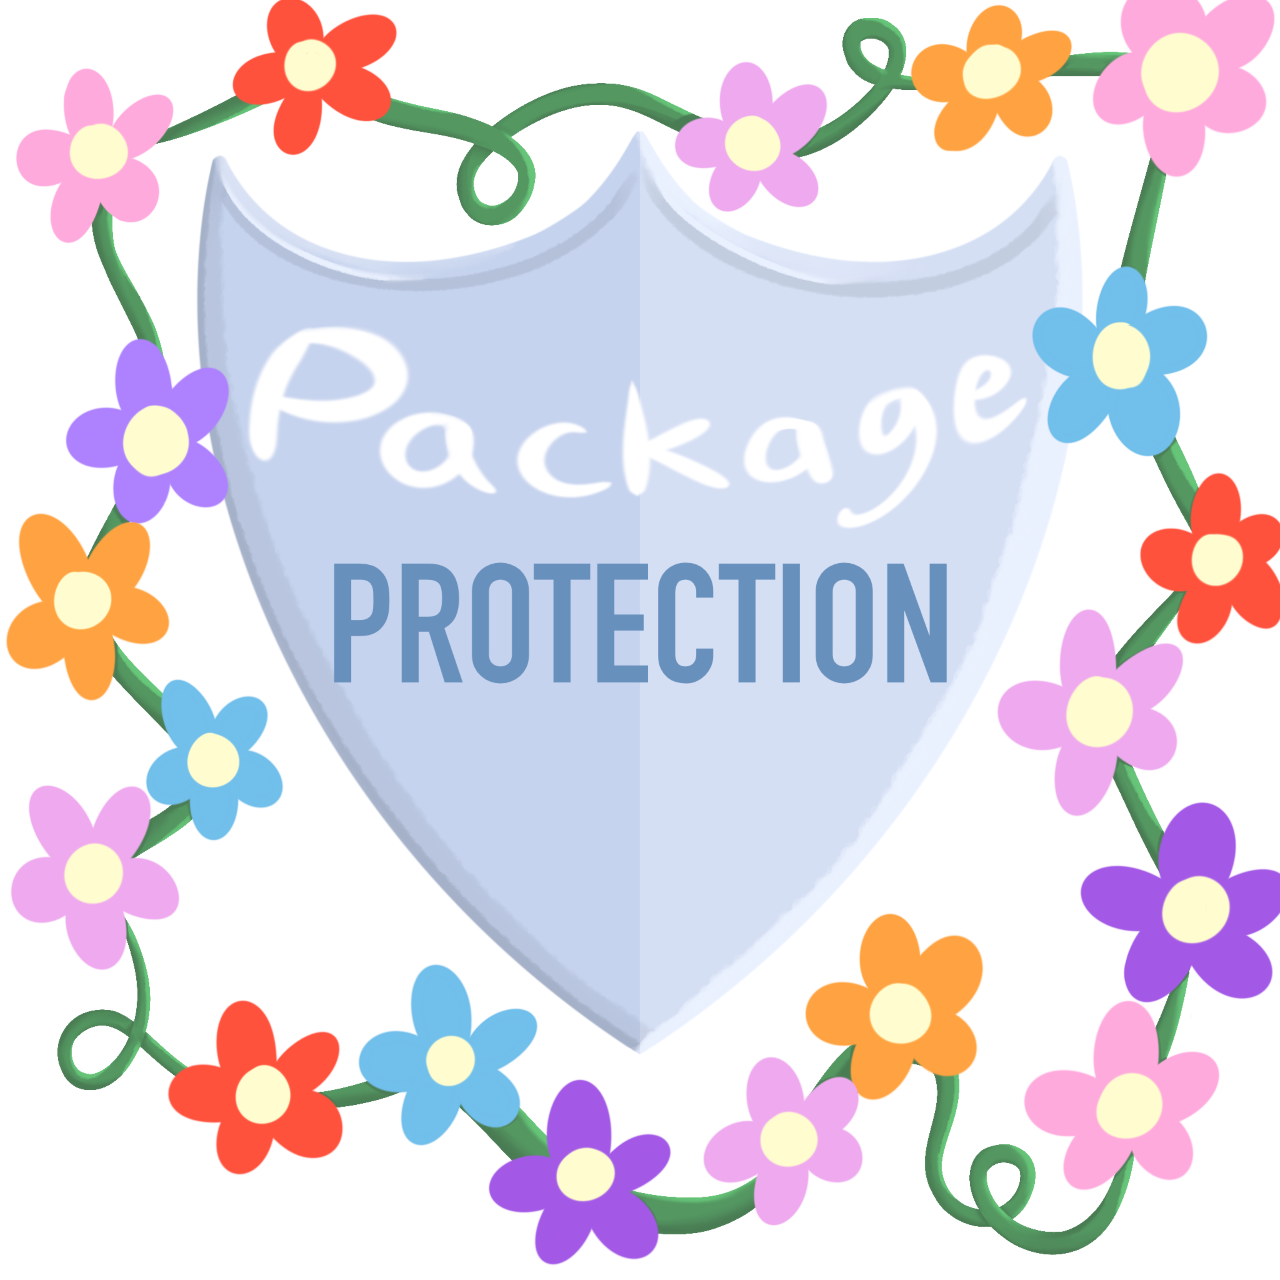 Package Protection - highly recommend